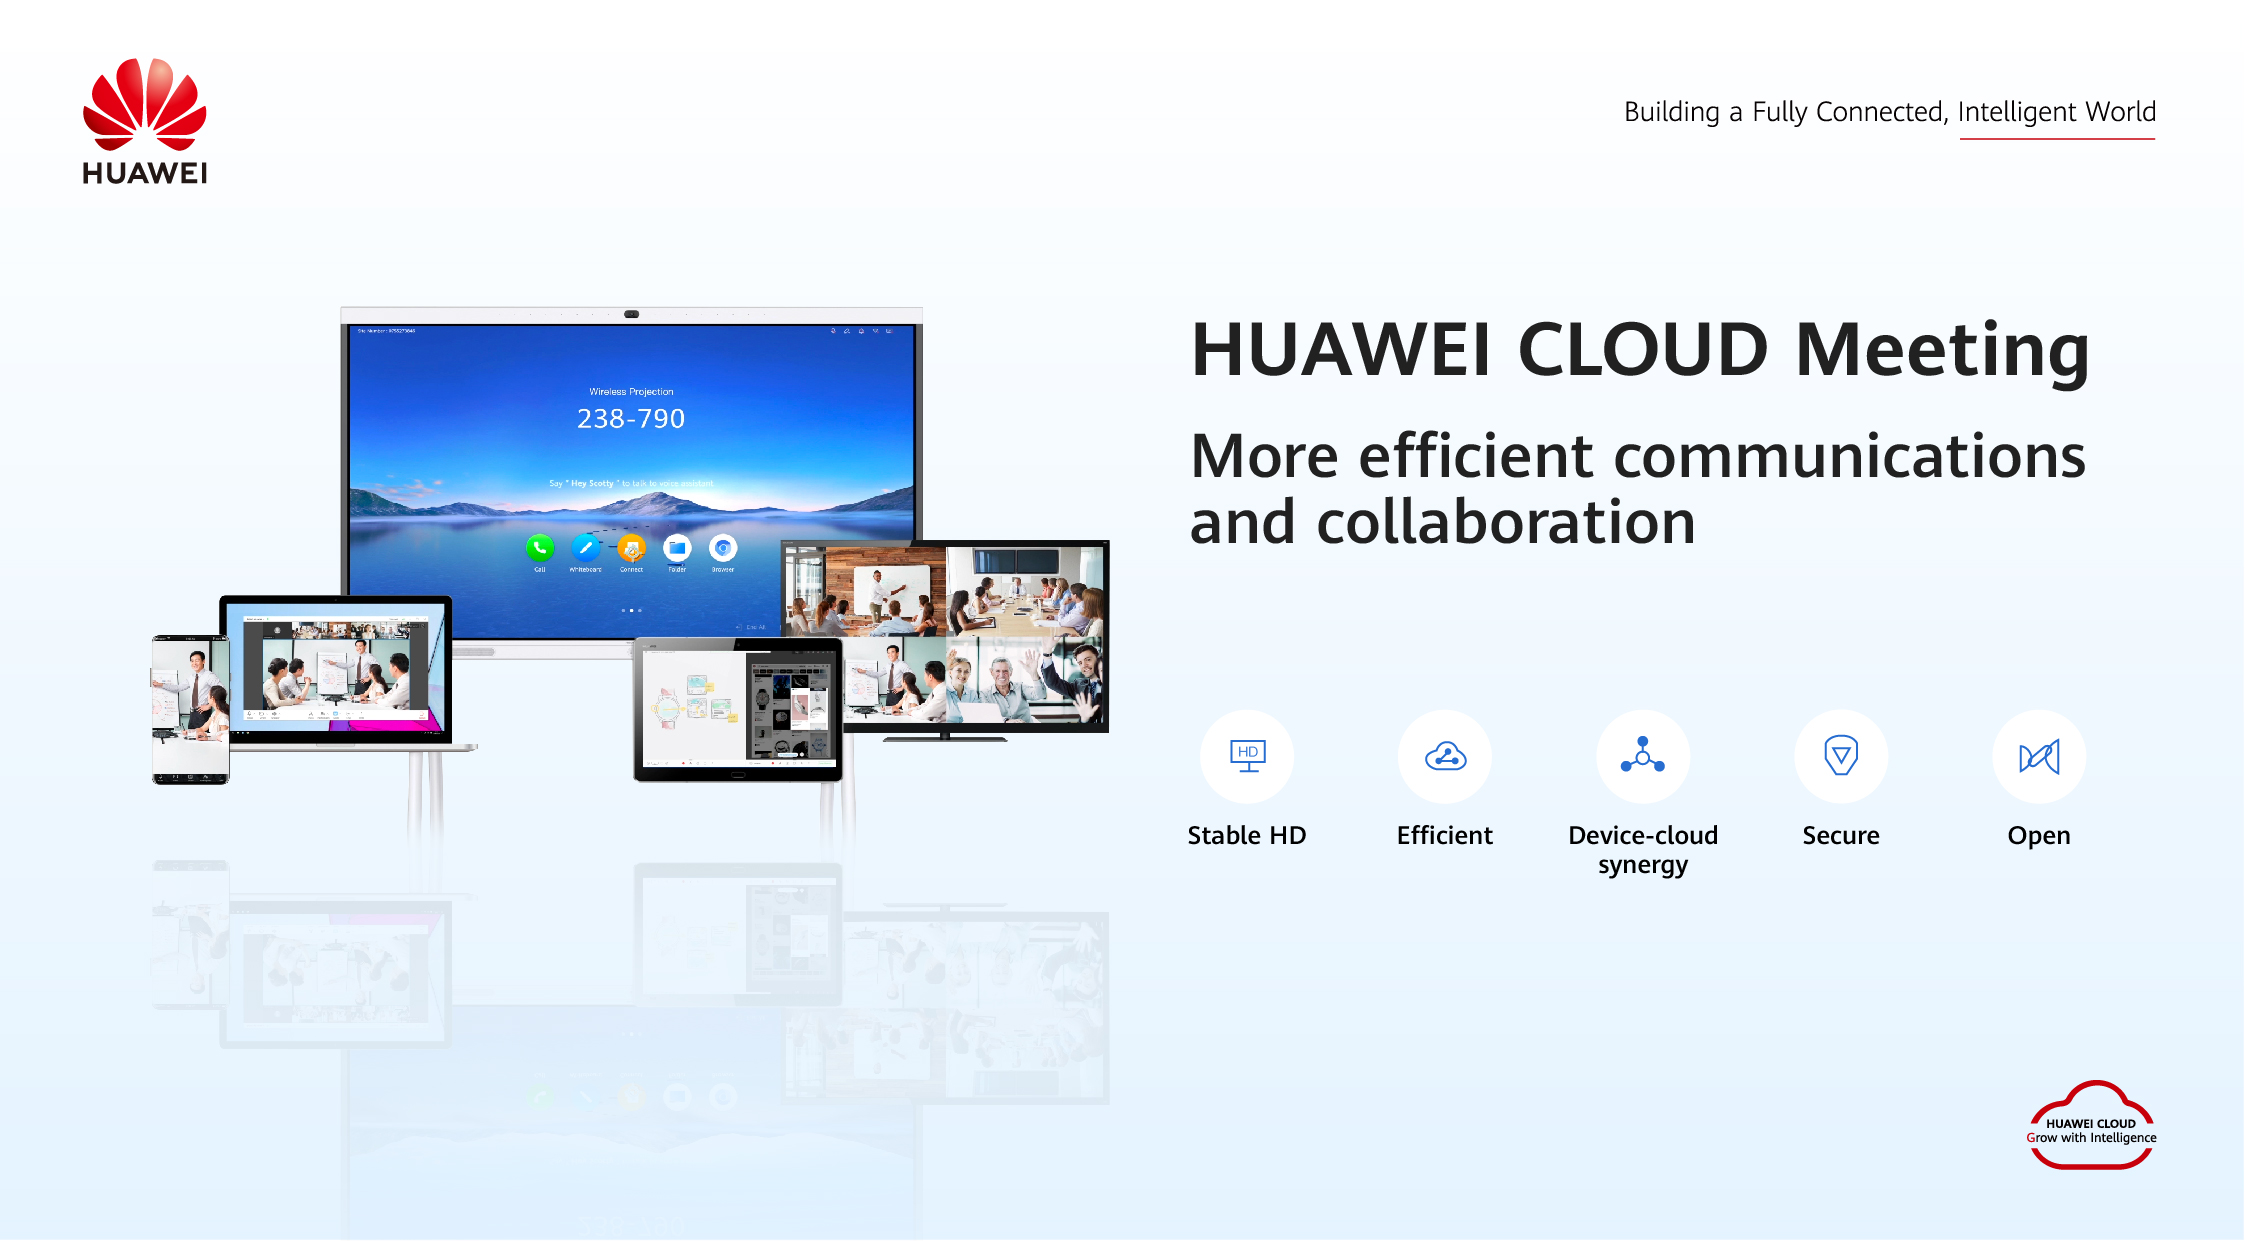 HUAWEI CLOUD Releases Device-Cloud Synergy Meeting Solution in APAC